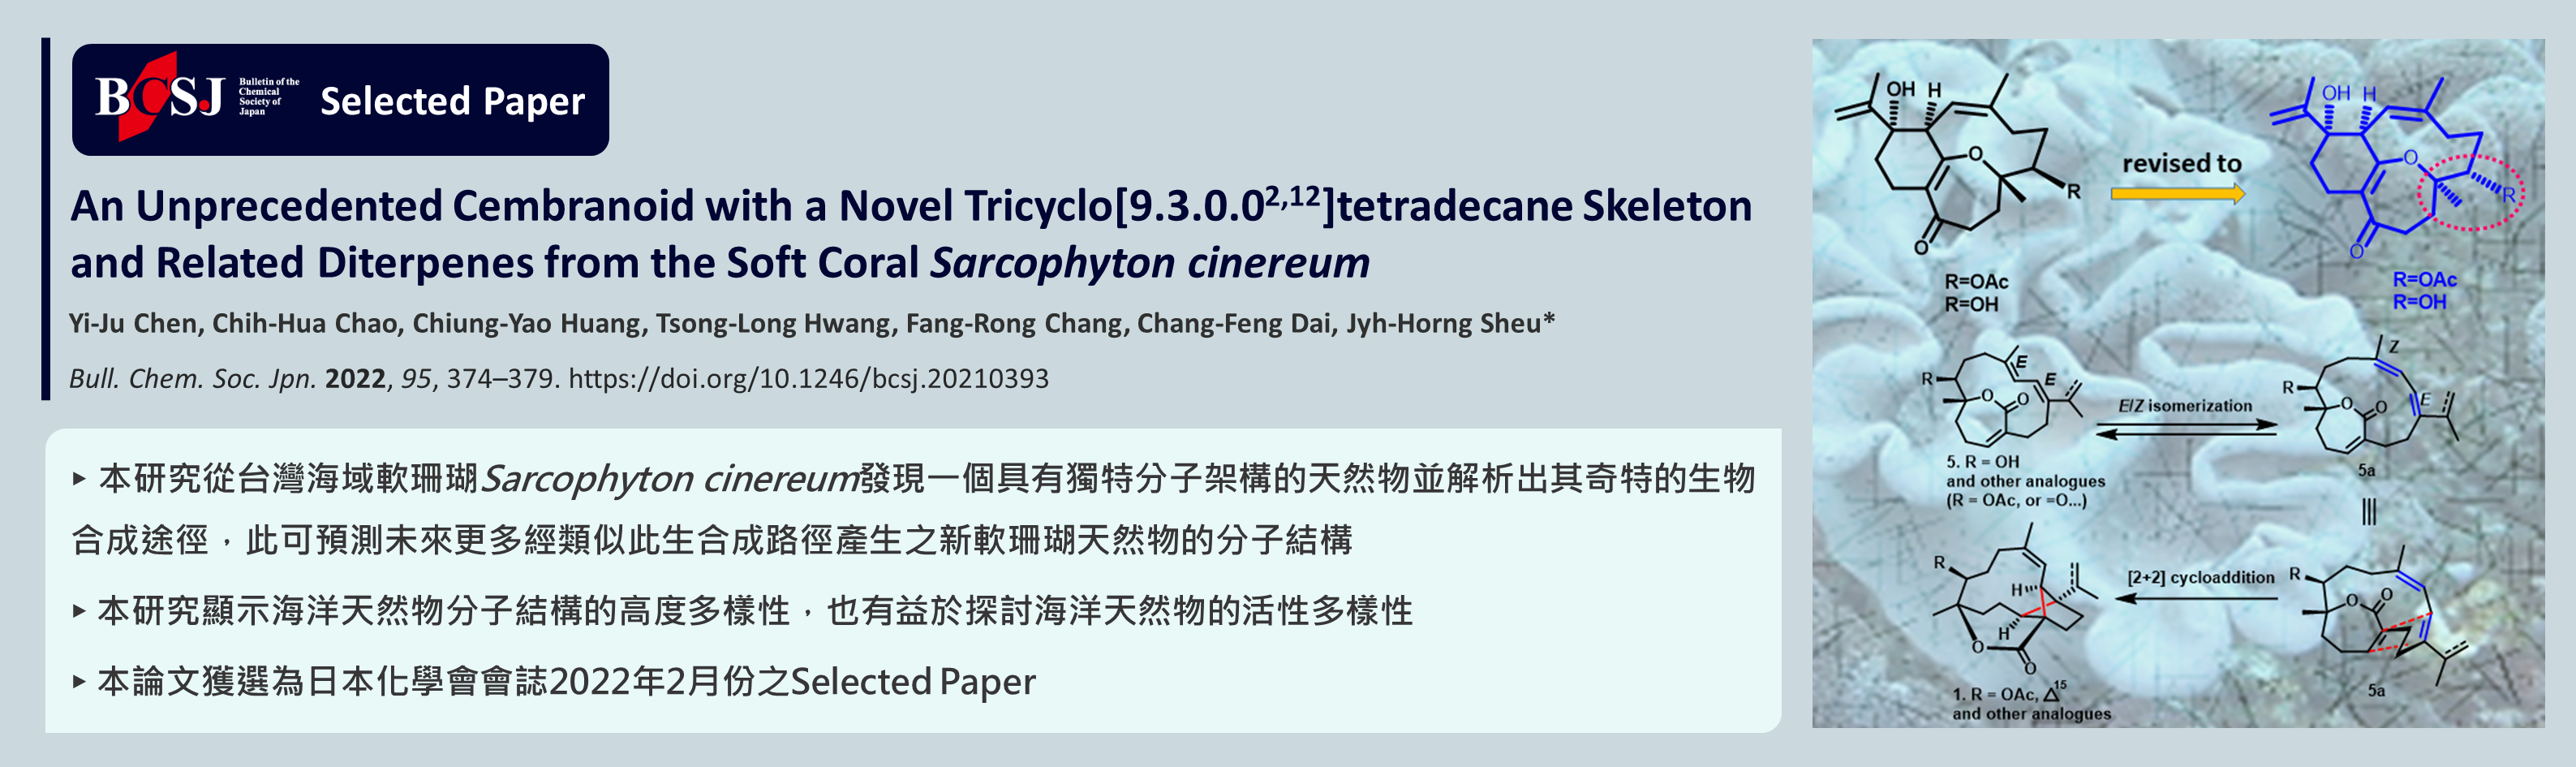 An Unprecedented Cembranoid with a Novel Tricyclo[9.3.0.02,12]tetradecane Skeleton and Related Diterpenes from the Soft Coral Sarcophyton cinereum